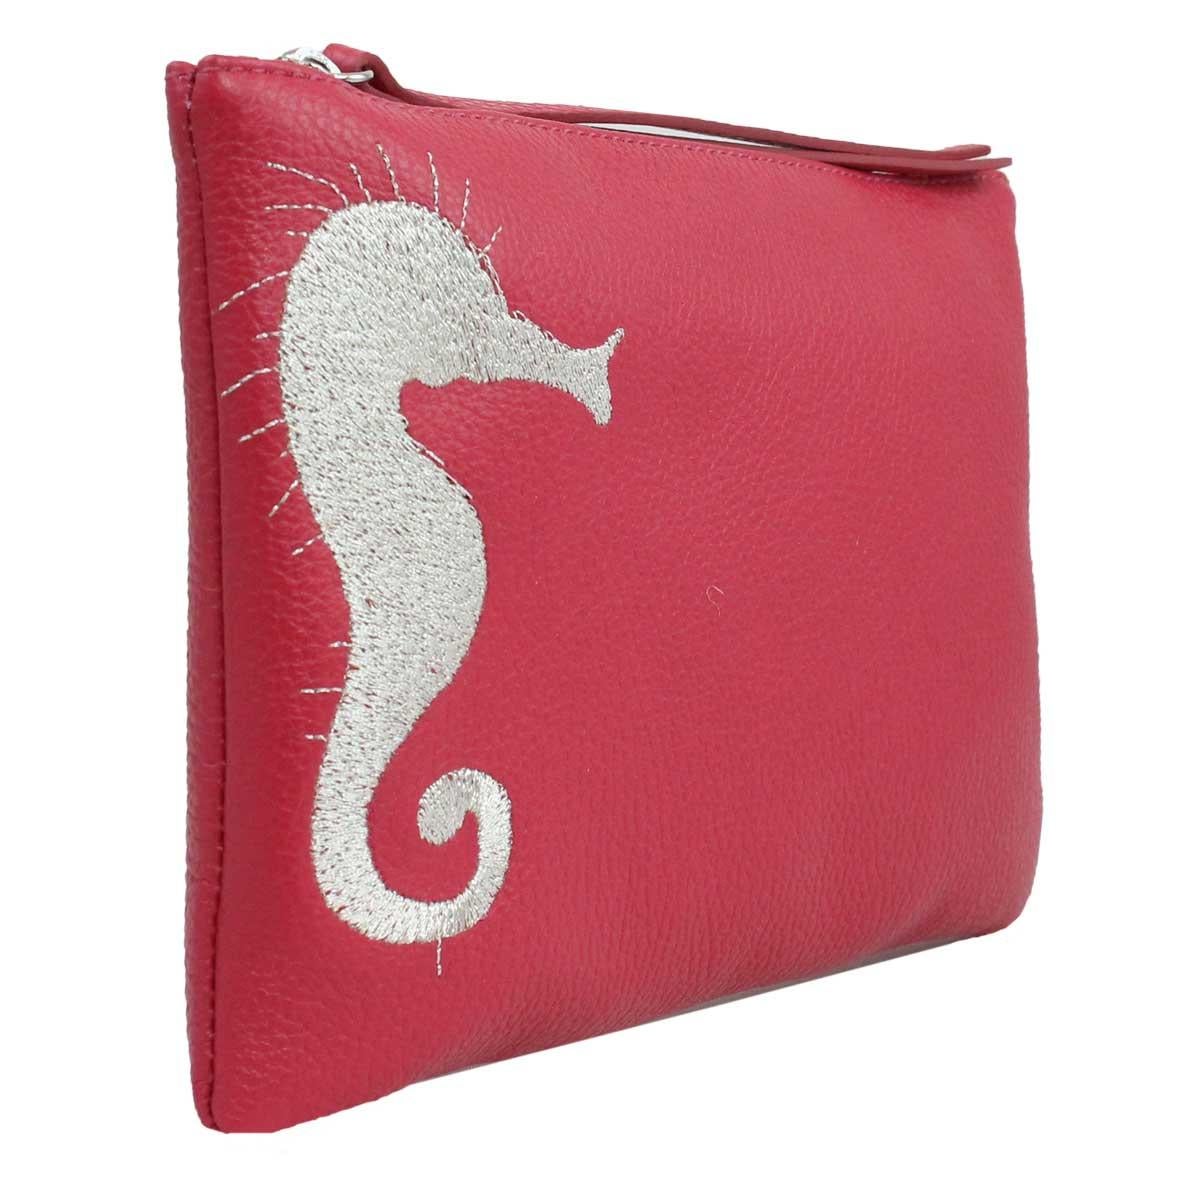 Le Moki Fucsia Leather Shoulder Handle Bag
totally made in italy and embellished with sea horse
really soft leather, zip closure 
pocket zip inside
shoulder strap inside
measurements: 17 * 26 cm